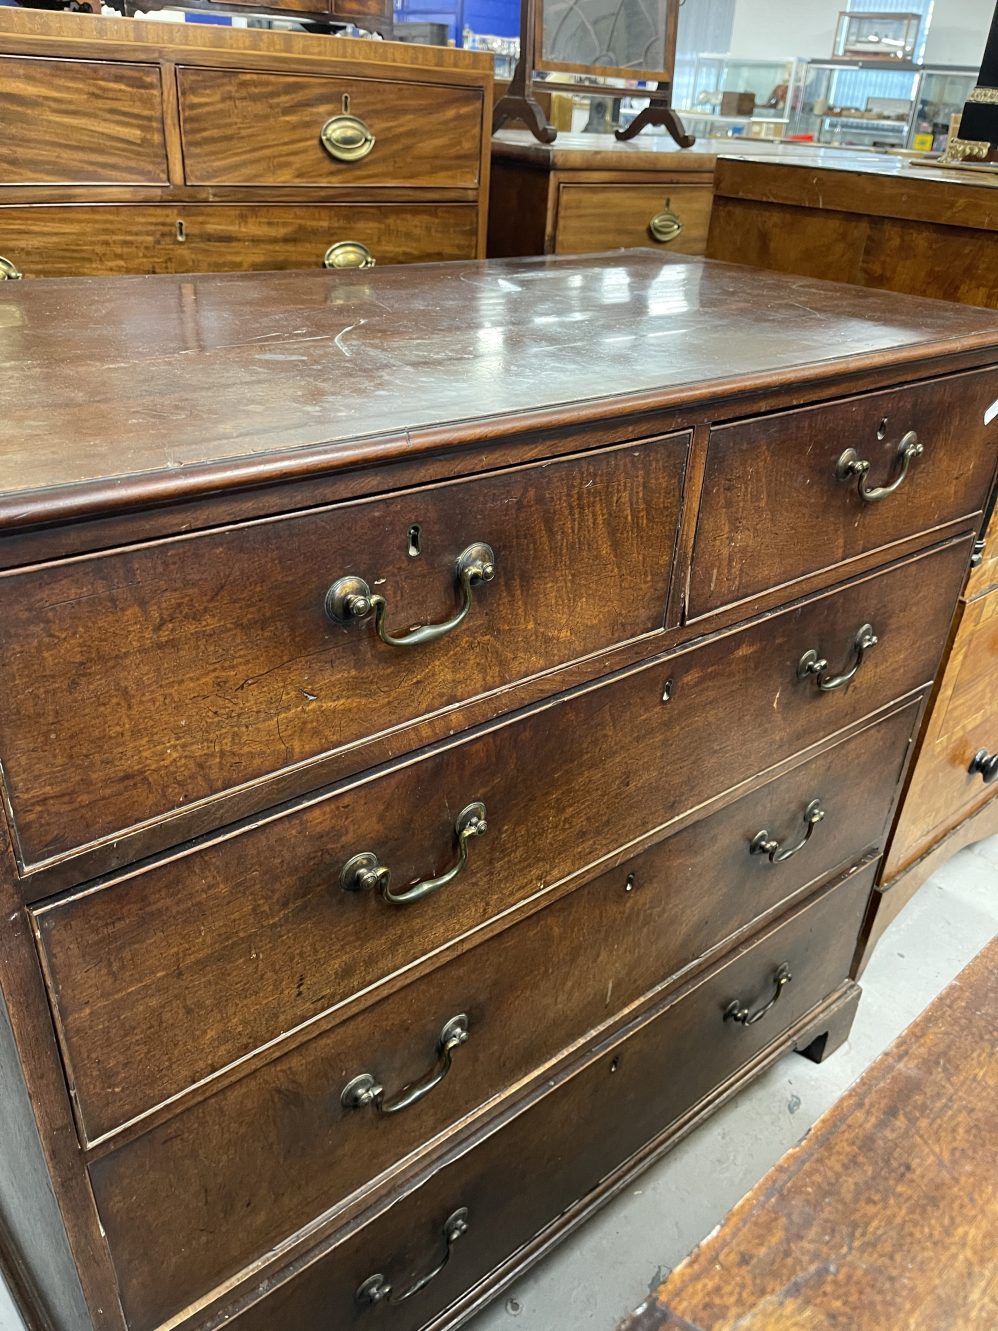 18th cent. Mahogany chest of two over three drawers. 43ins. x 23ins. x 42ins.